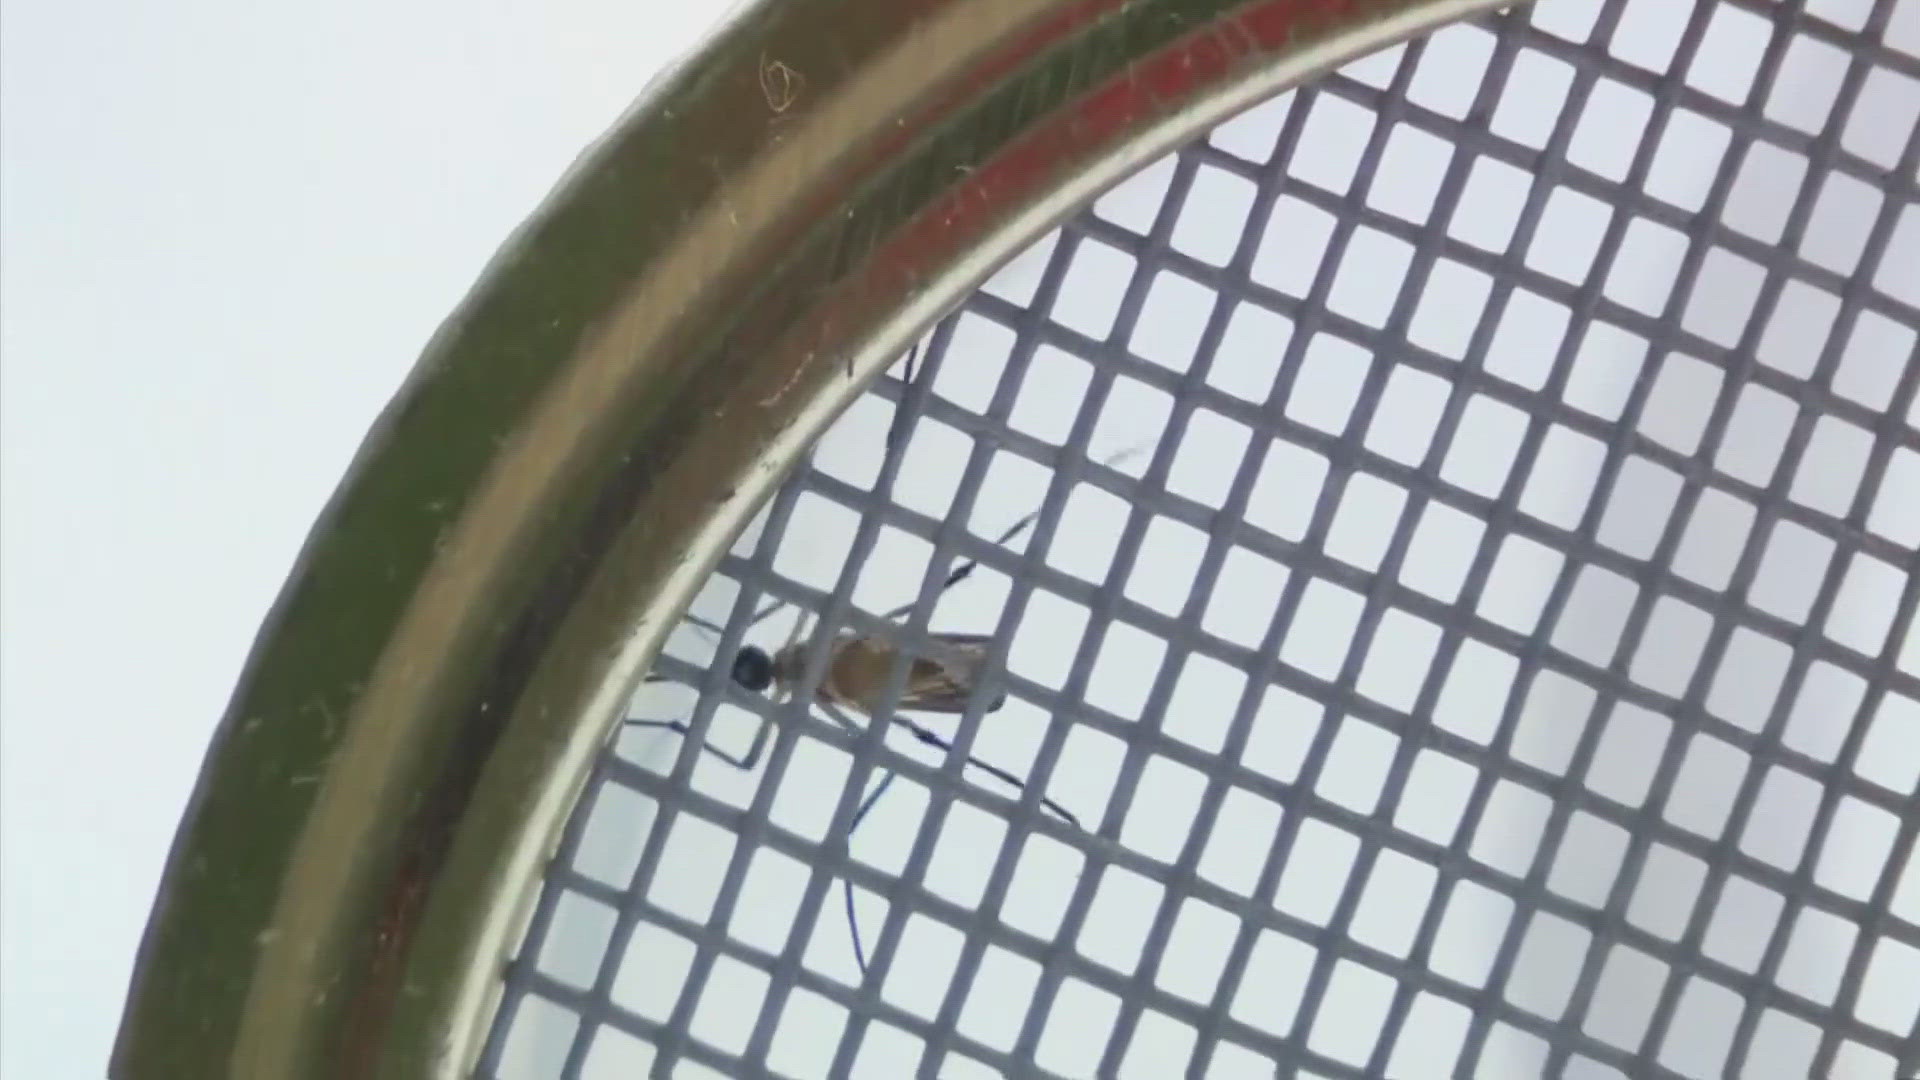 6 News spoke with an expert about why mosquitos become more prominent around this time of year.